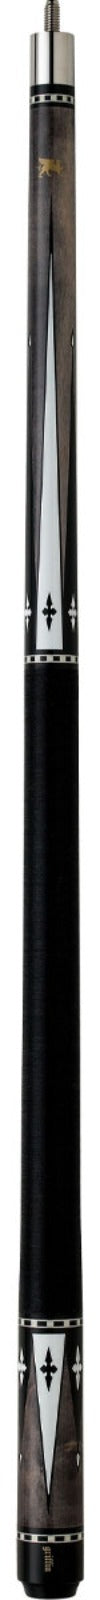 Griffin GR24 Pool Cue -Griffin